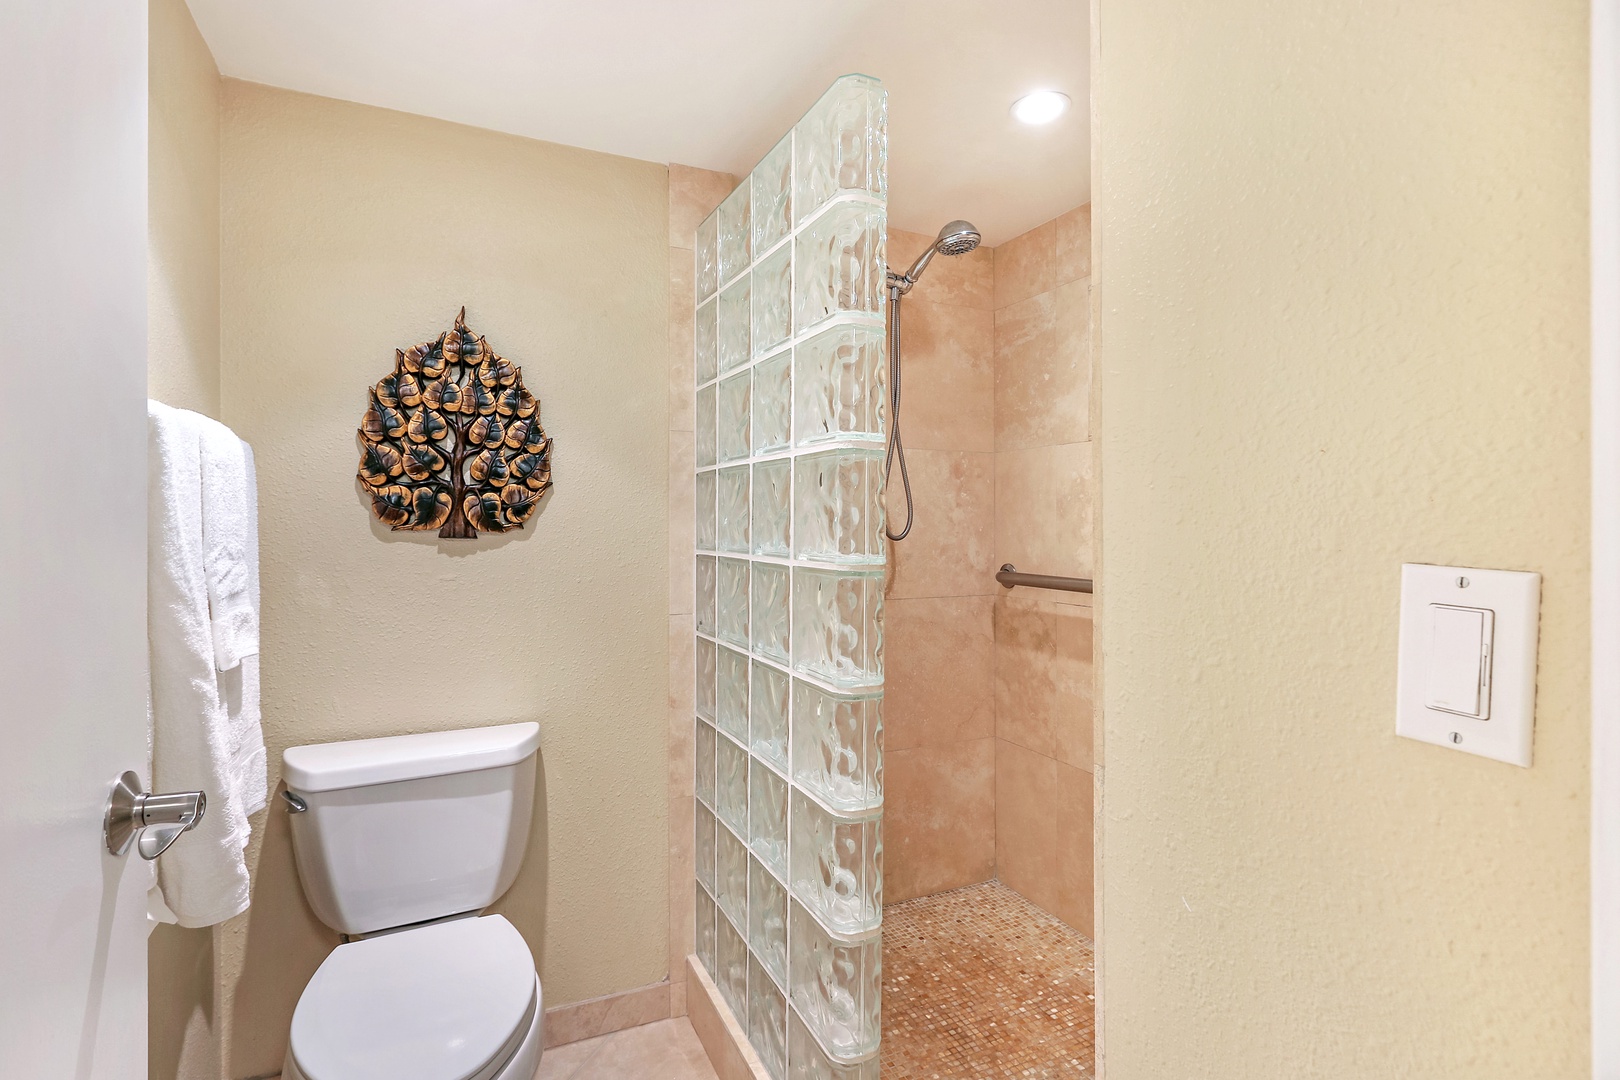 Ensuite bathroom with walk-in shower laundry area